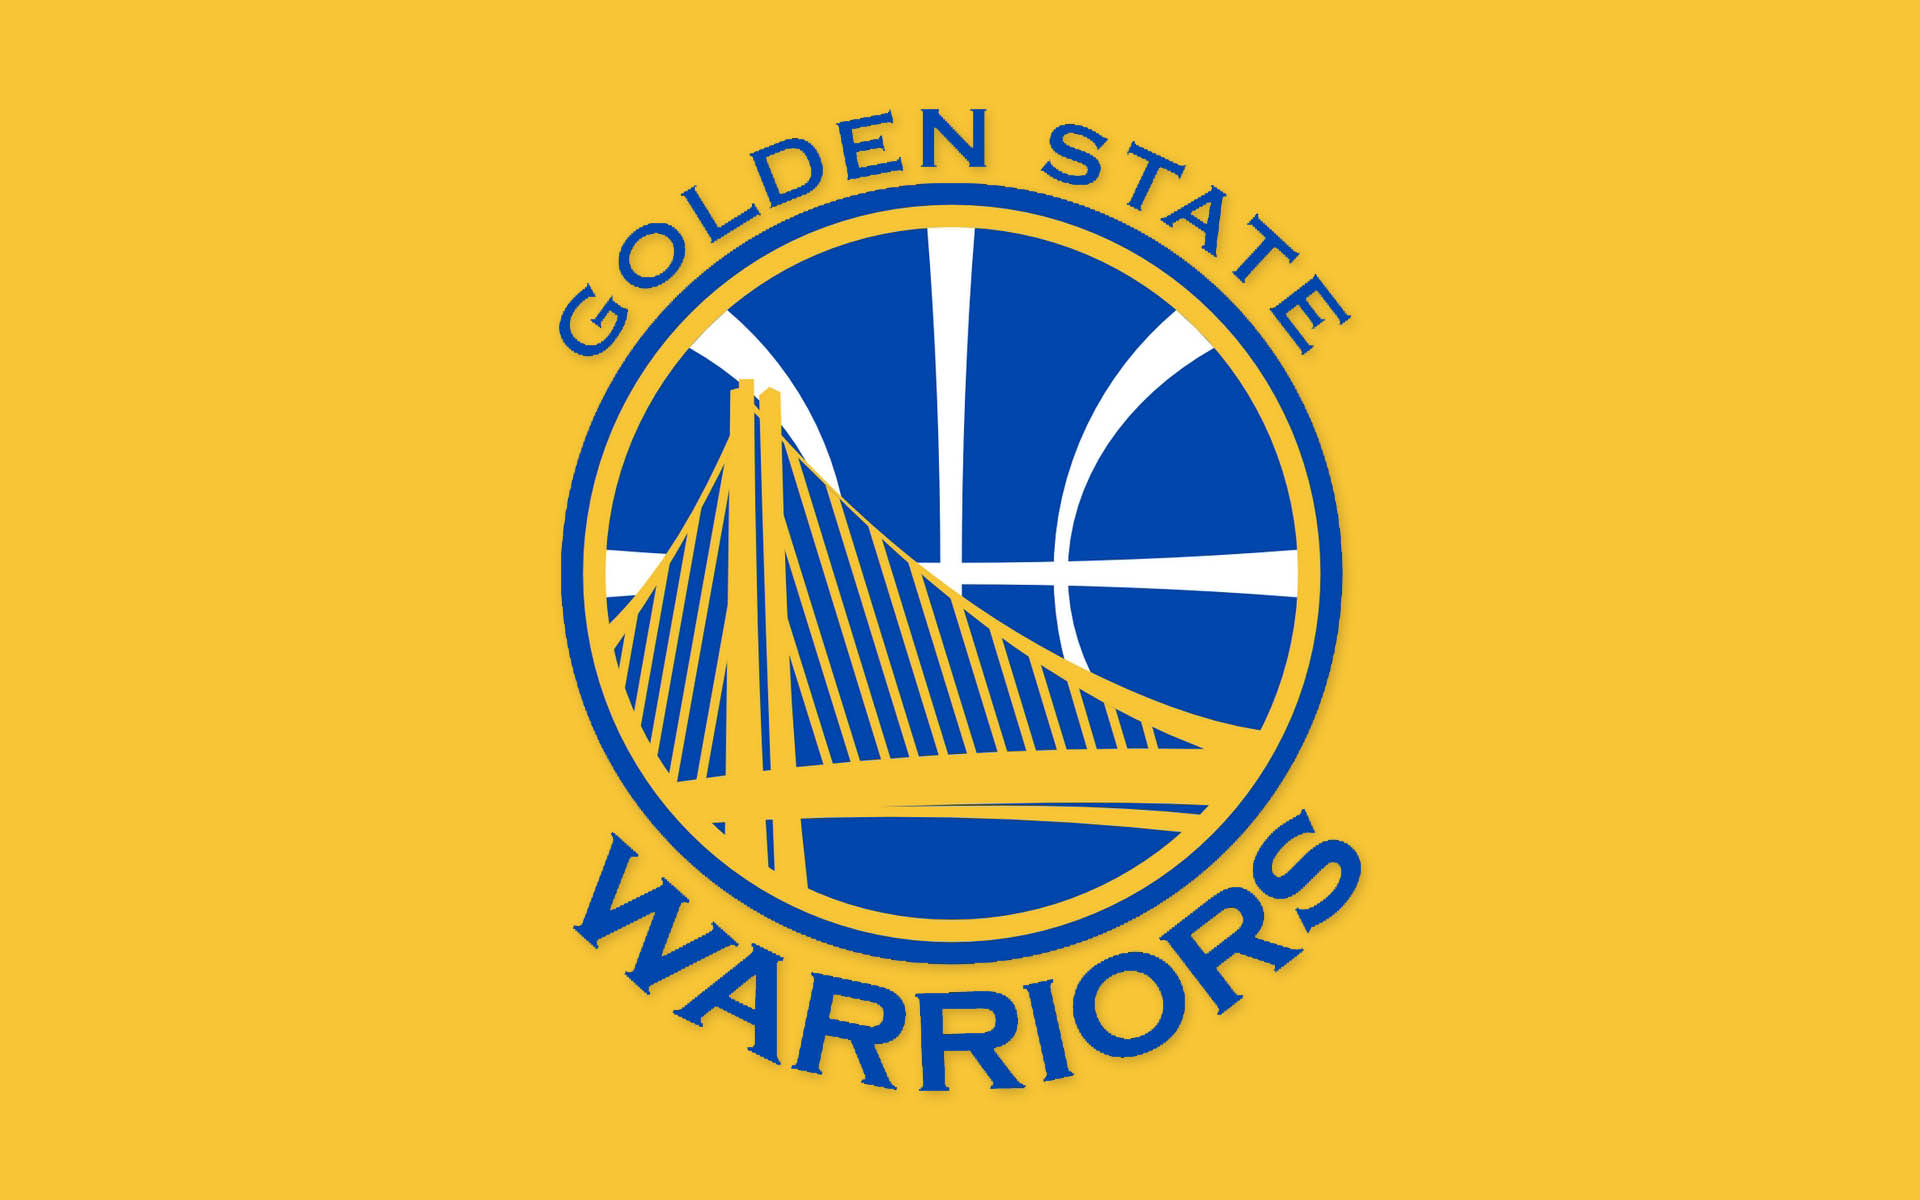 Why are the Warriors from Golden State and not Oakland? | For The Win